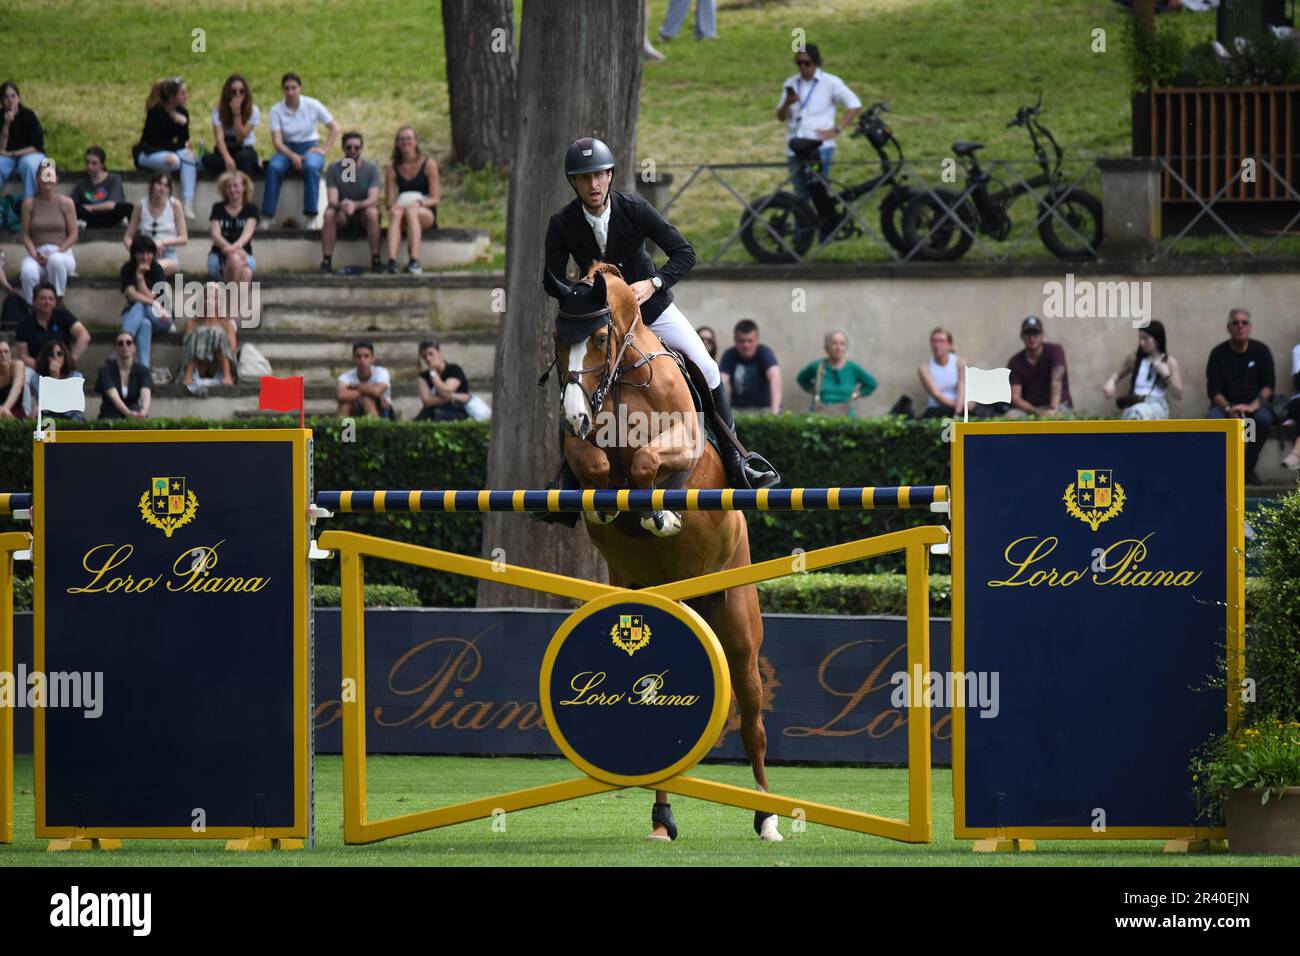 CSIO Roma 2023, Piazza di Siena, Rome, Italy, may 25 2023. Equestrian jumping competition Tab A against the clock, Pieter Devos (BEL) jumping. Photo Credit: Fabio Pagani/Alamy Live News Stock Photo